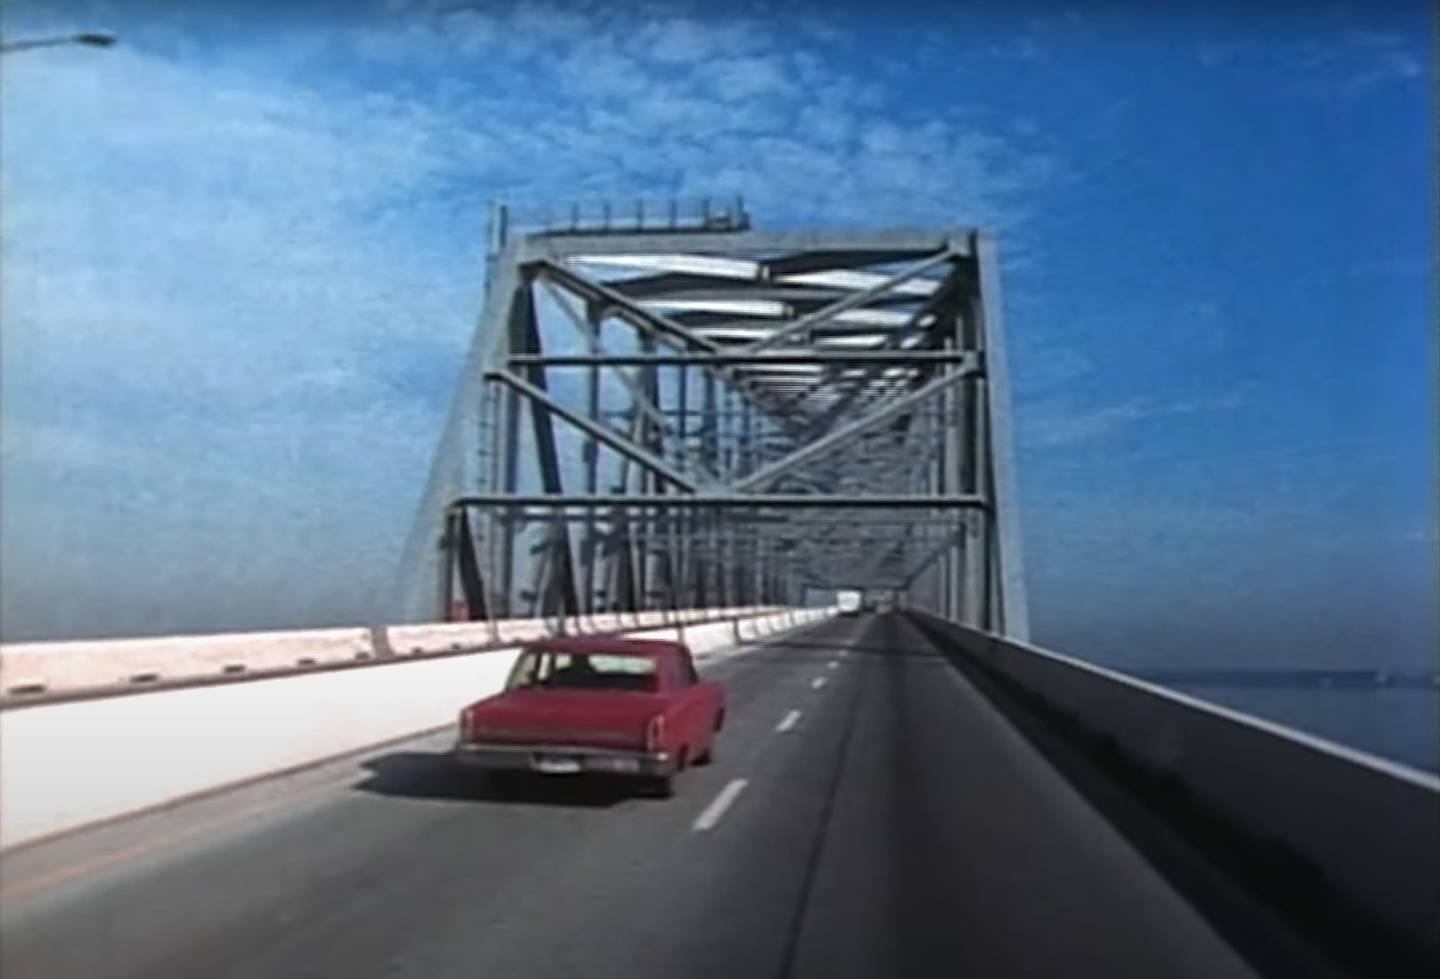 Screen shot from “One Dollar,” a 1987 16 mm student film about the Francis Scott Key Bridge